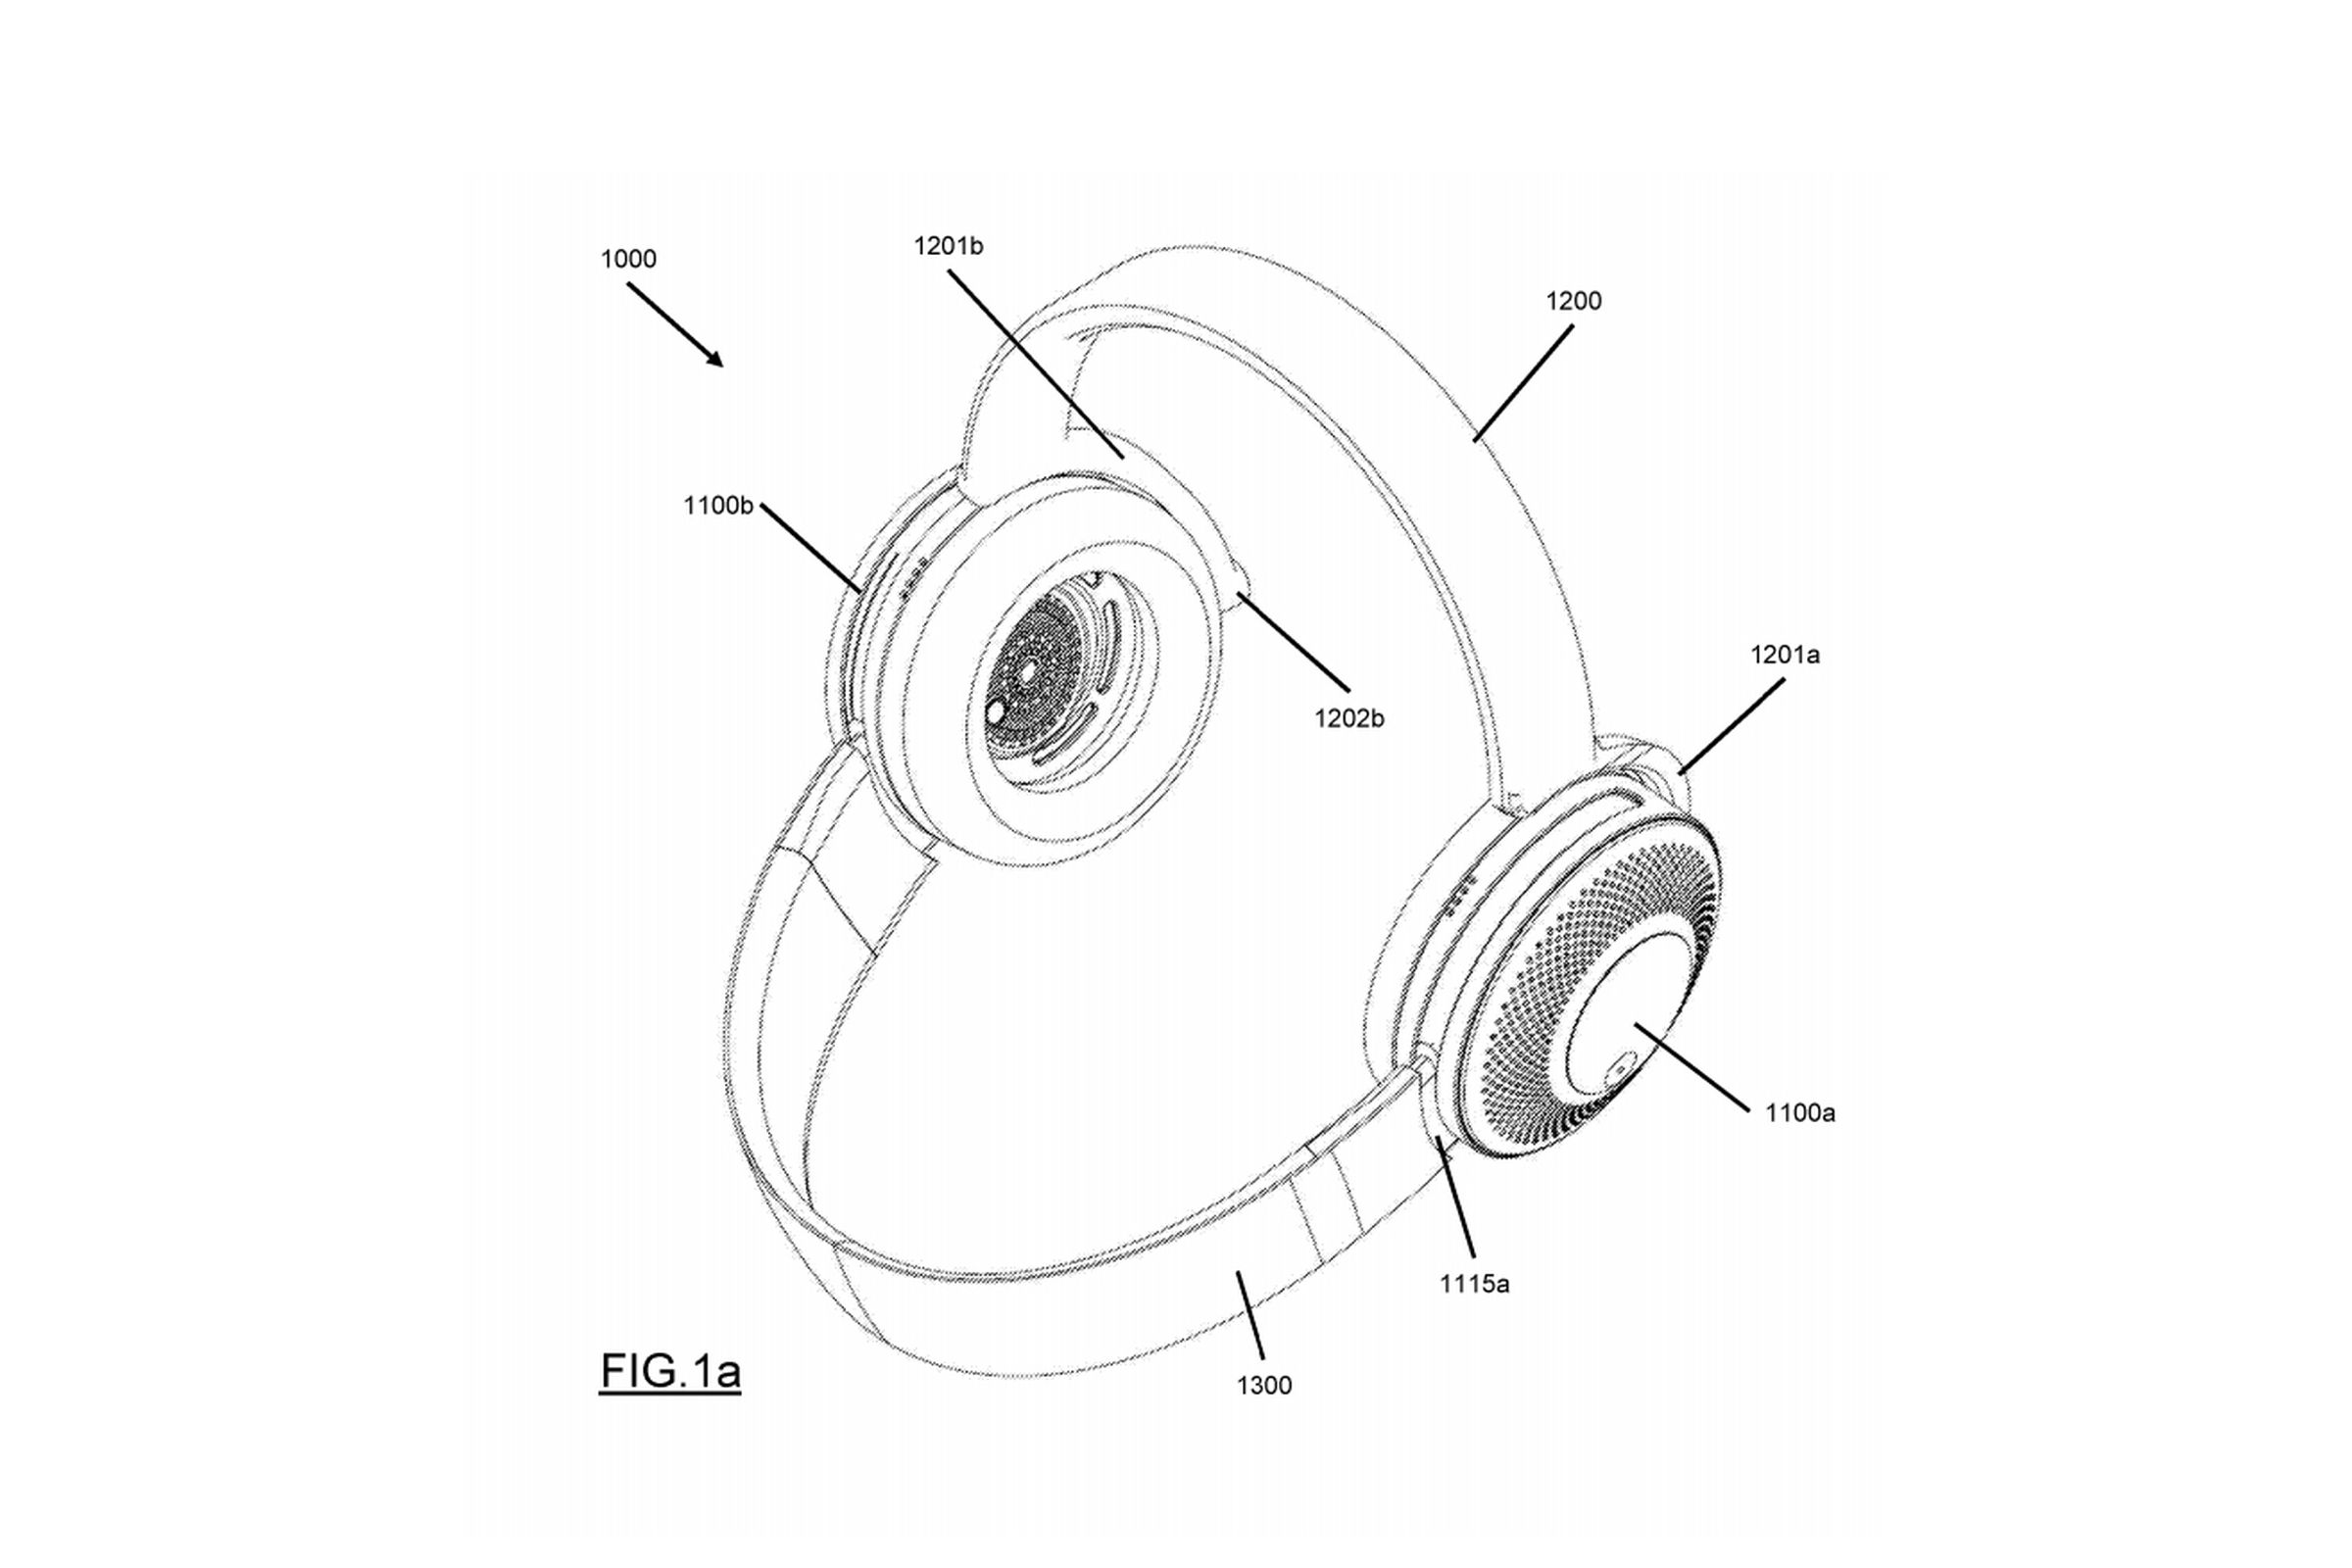 The patent shows a pair of headphones with an additional band that provides filtered air.